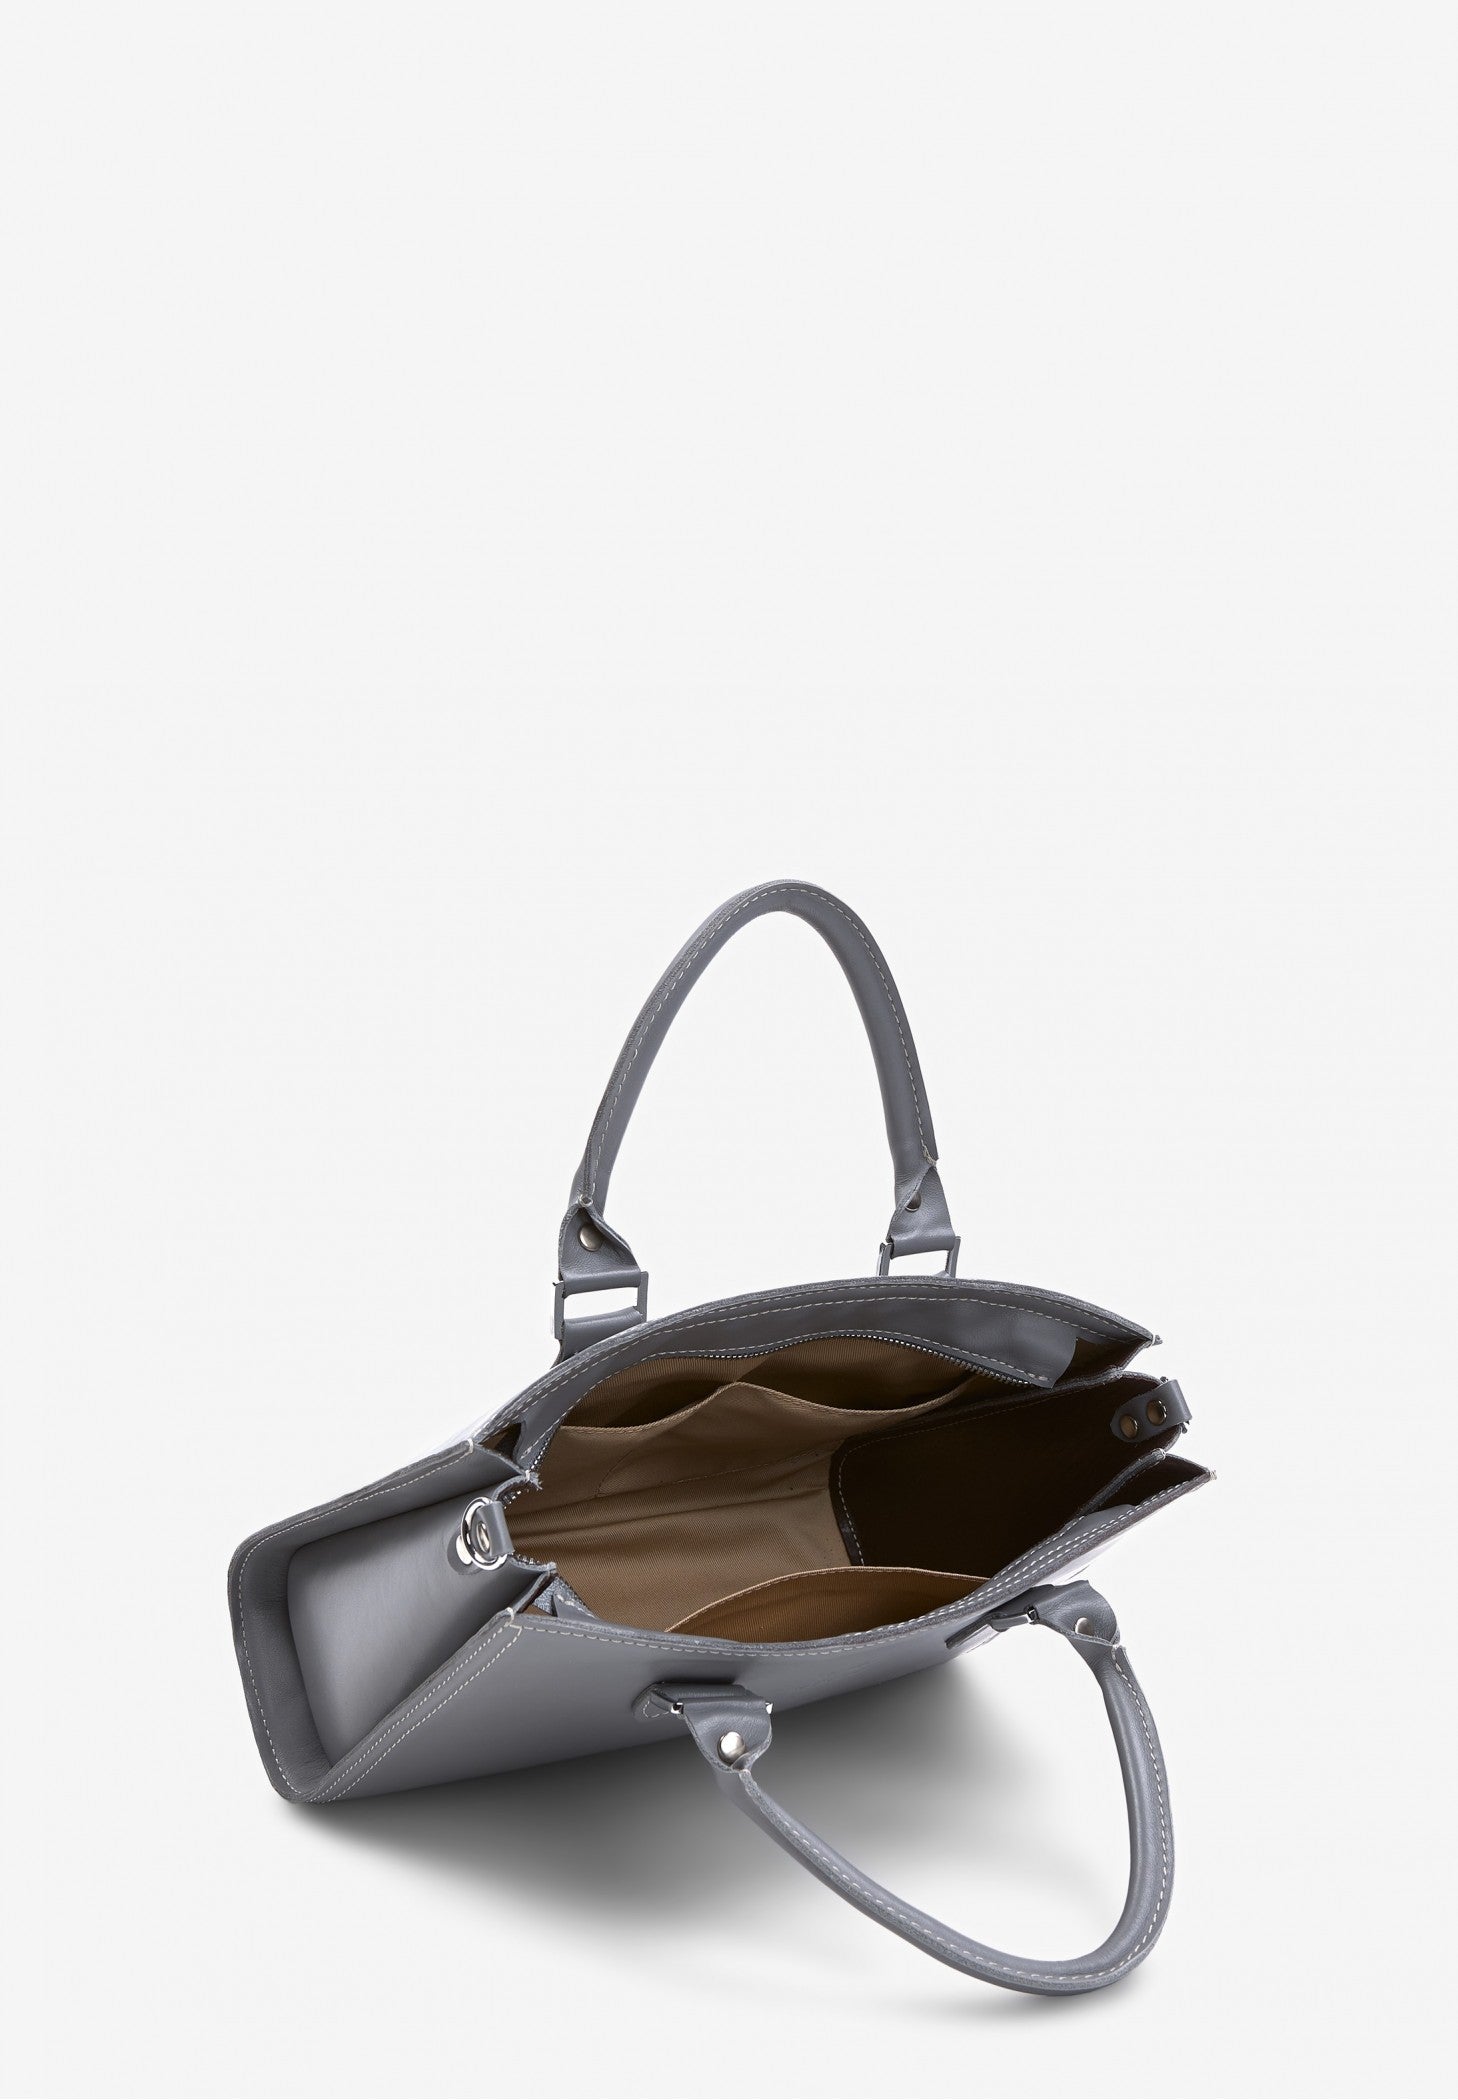 grey leather bag for women